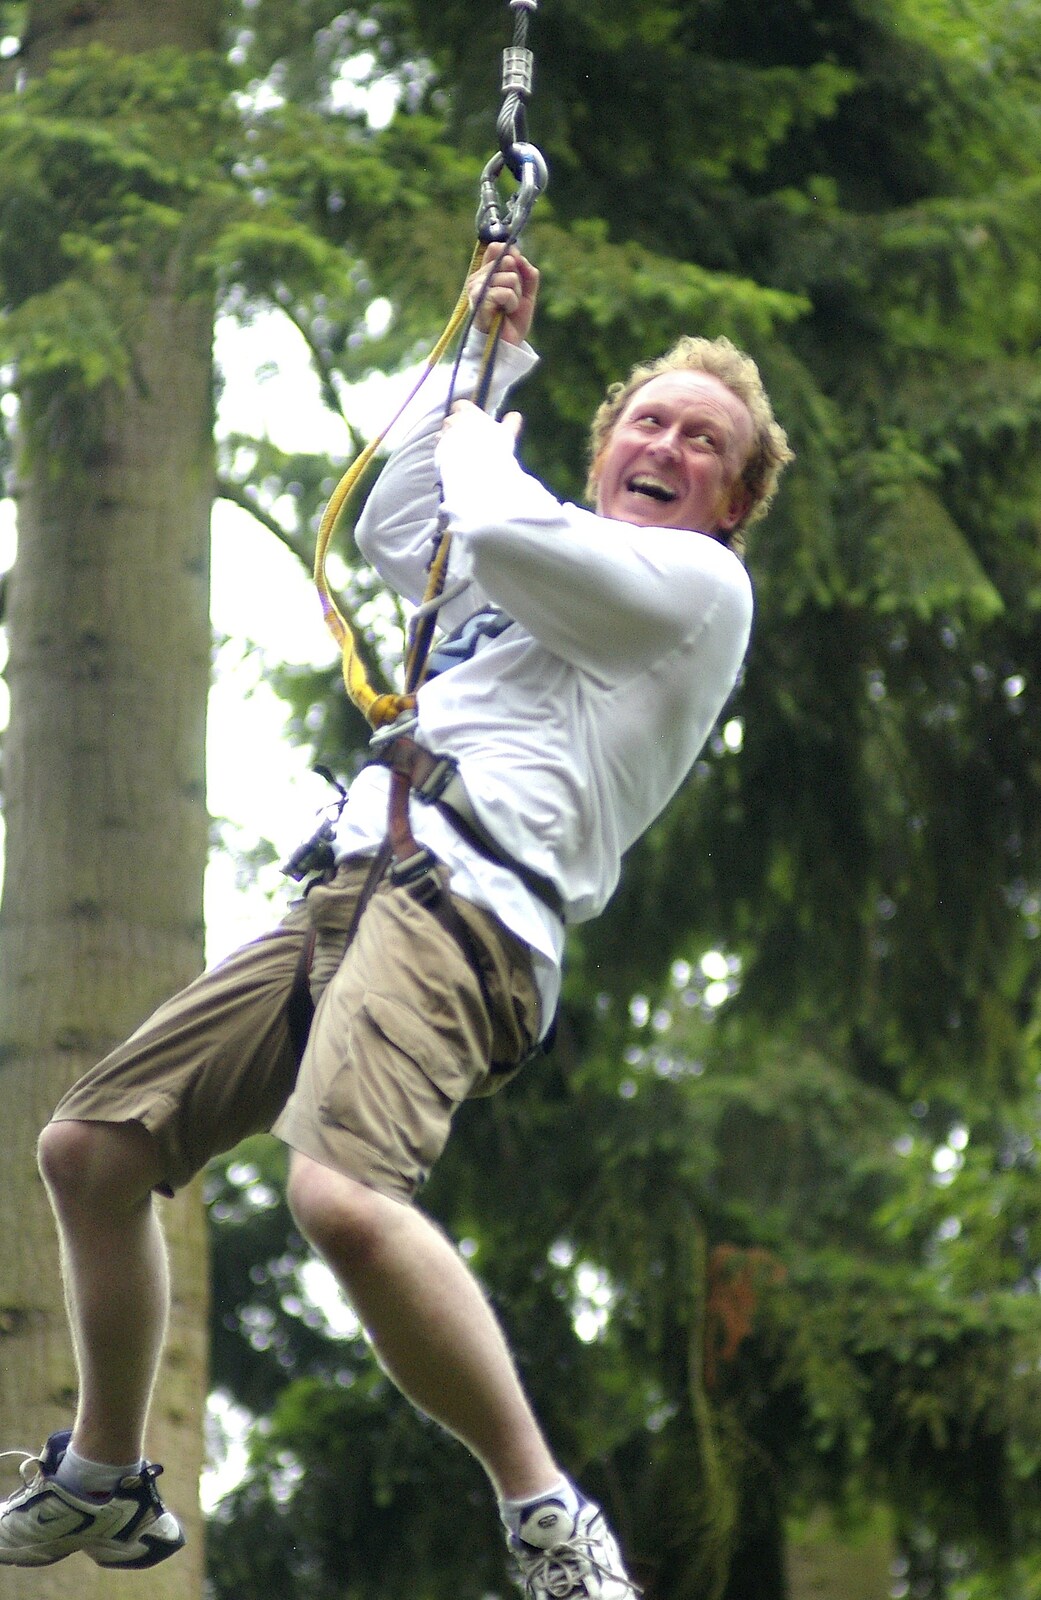 More Tarzan swing action from Qualcomm Cambridge "Go Ape", High Lodge, Thetford Forest - 27th July 2006